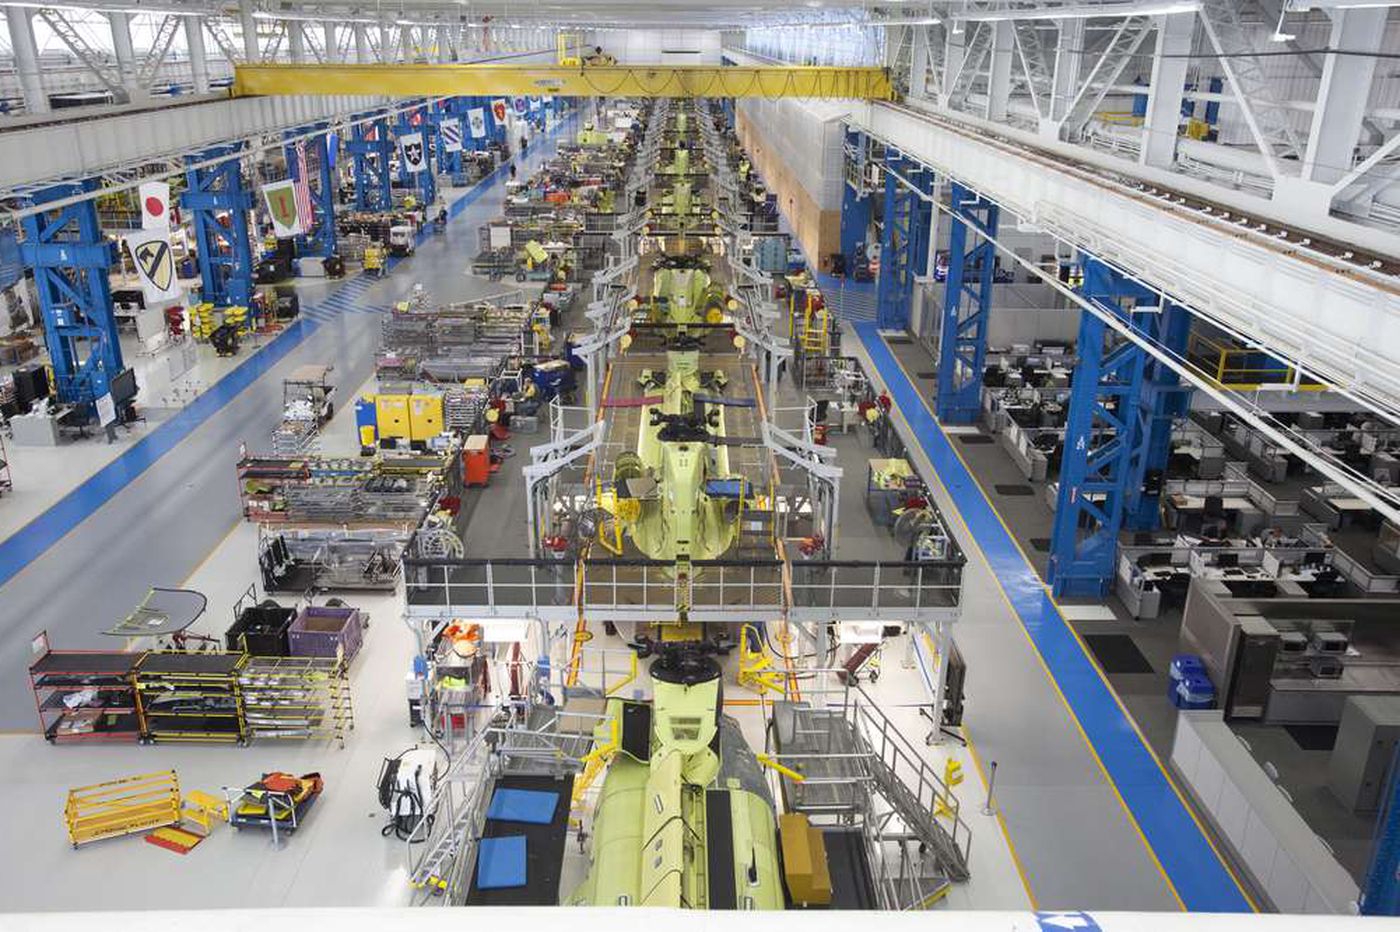 Boeing S Ridley Park Plant Receives 265m Contract From Pentagon For 9